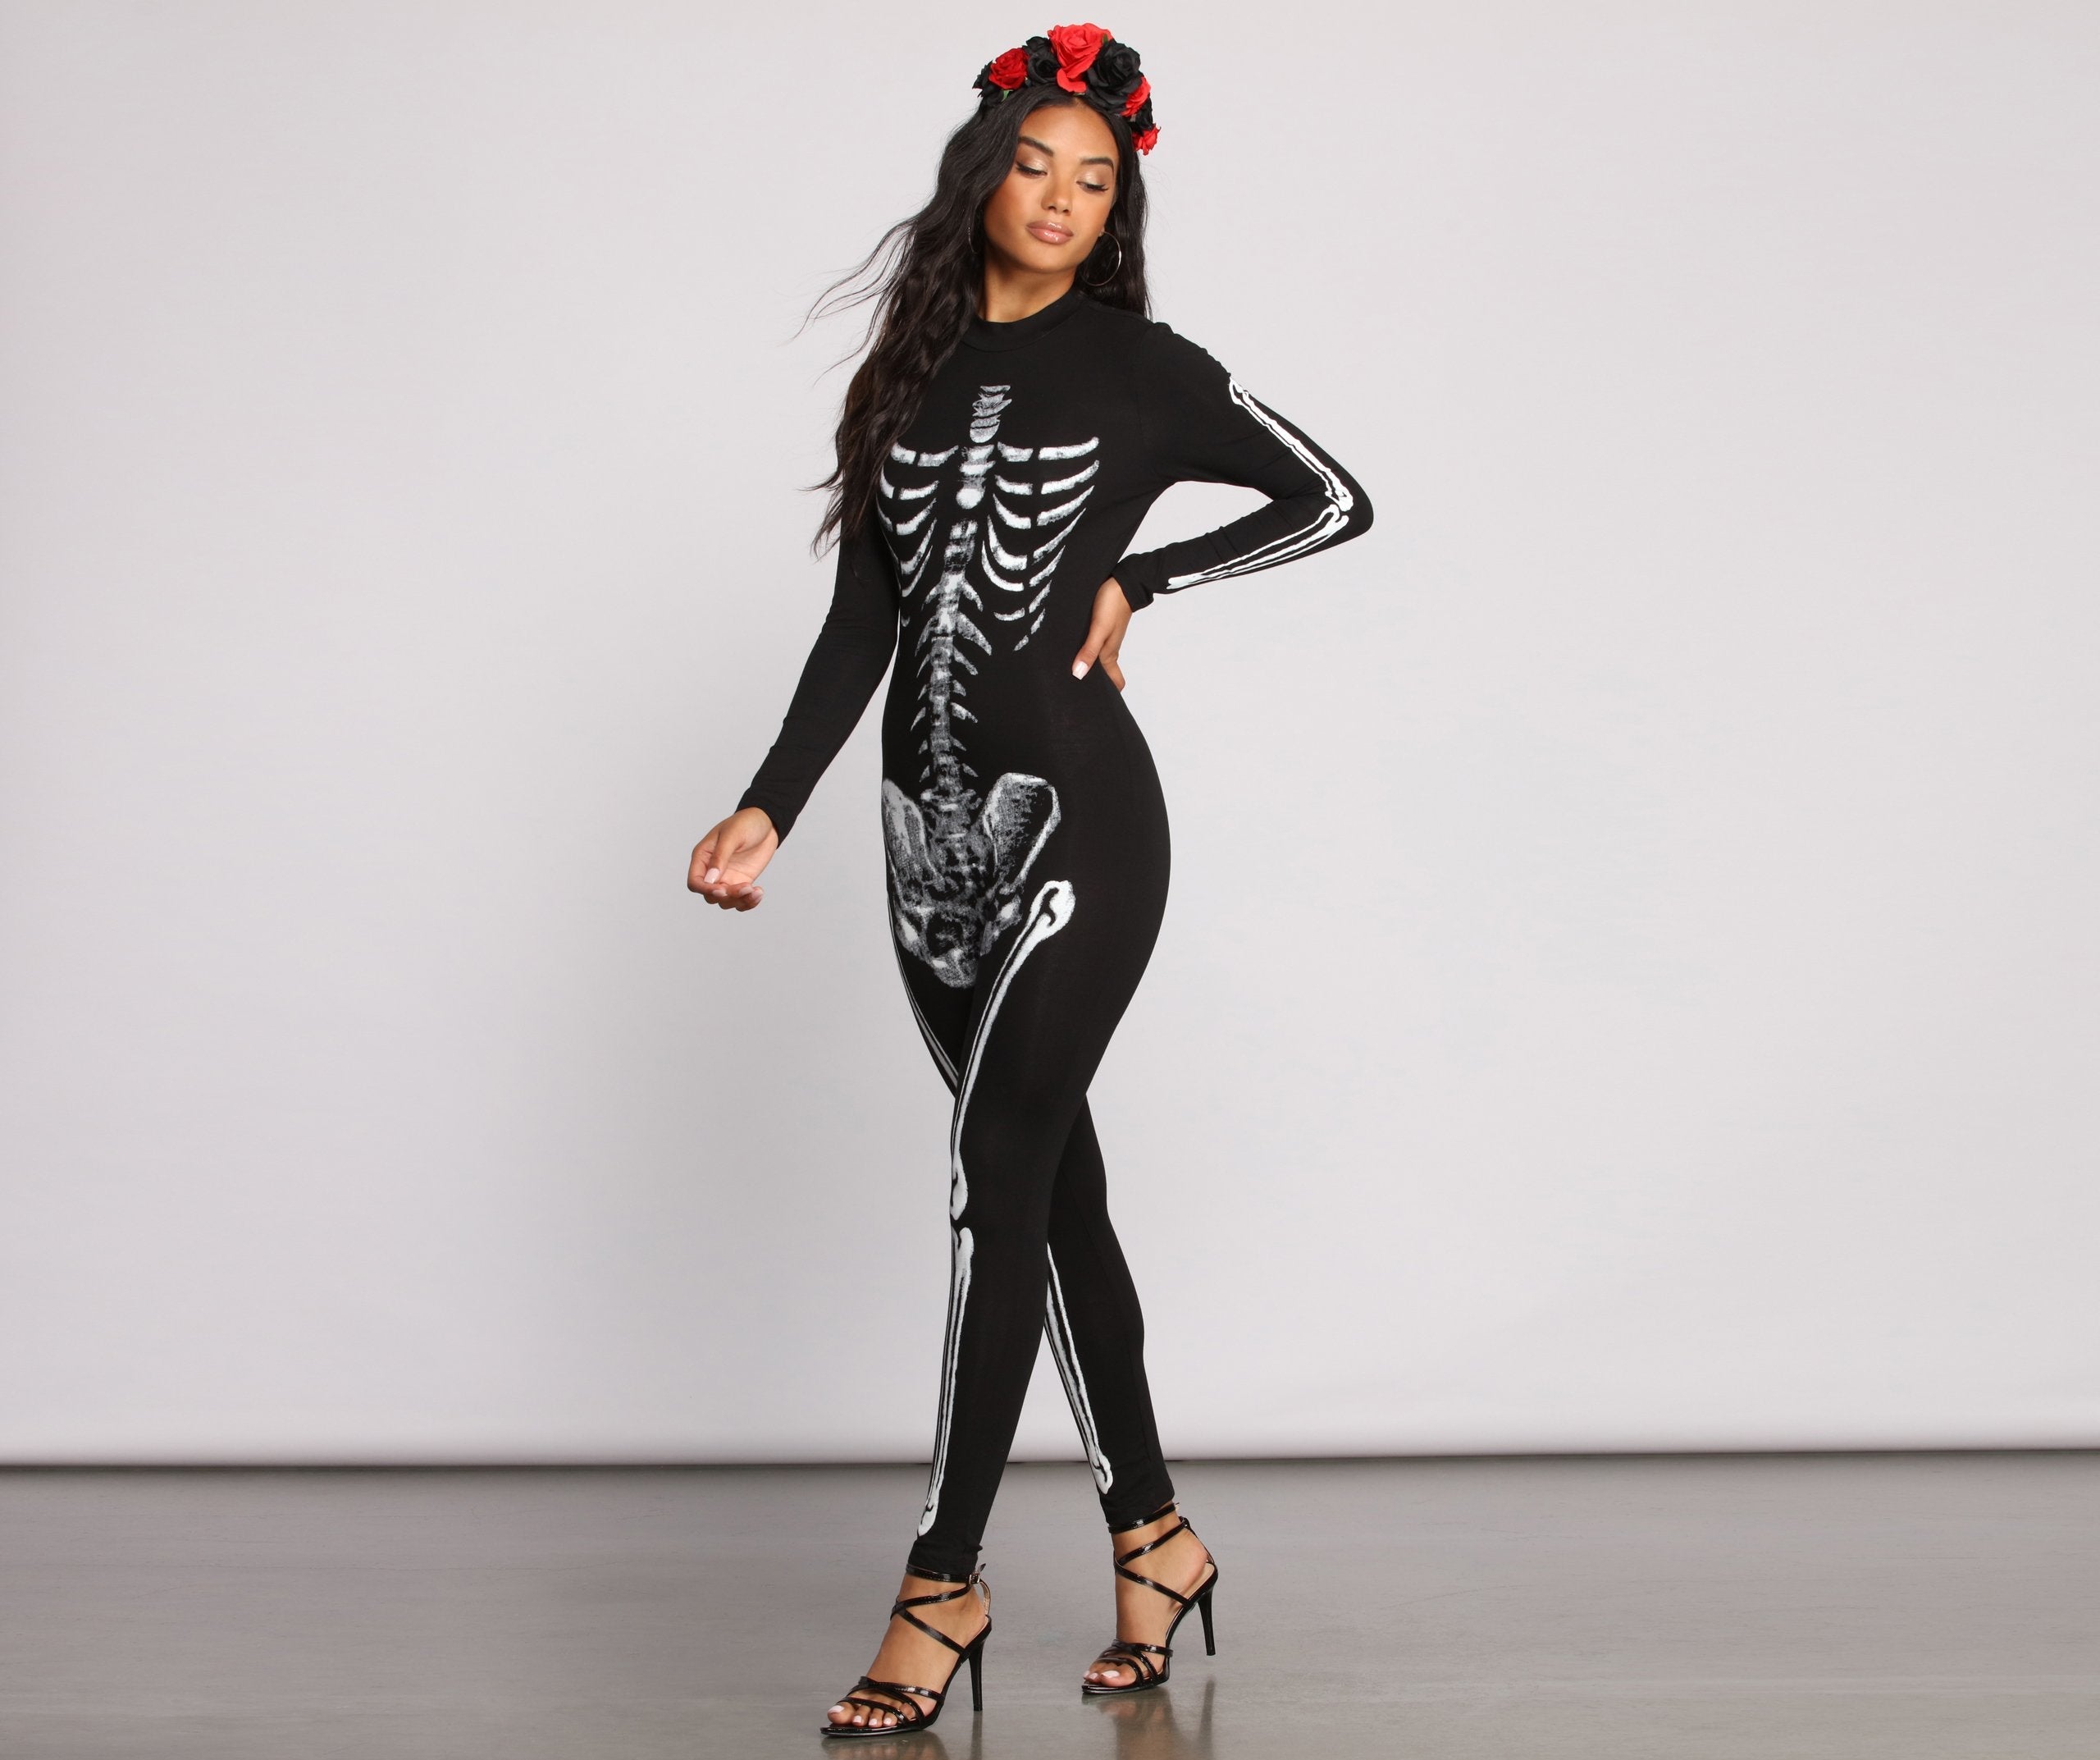 Bad to the Bone Skelton Knit Catsuit